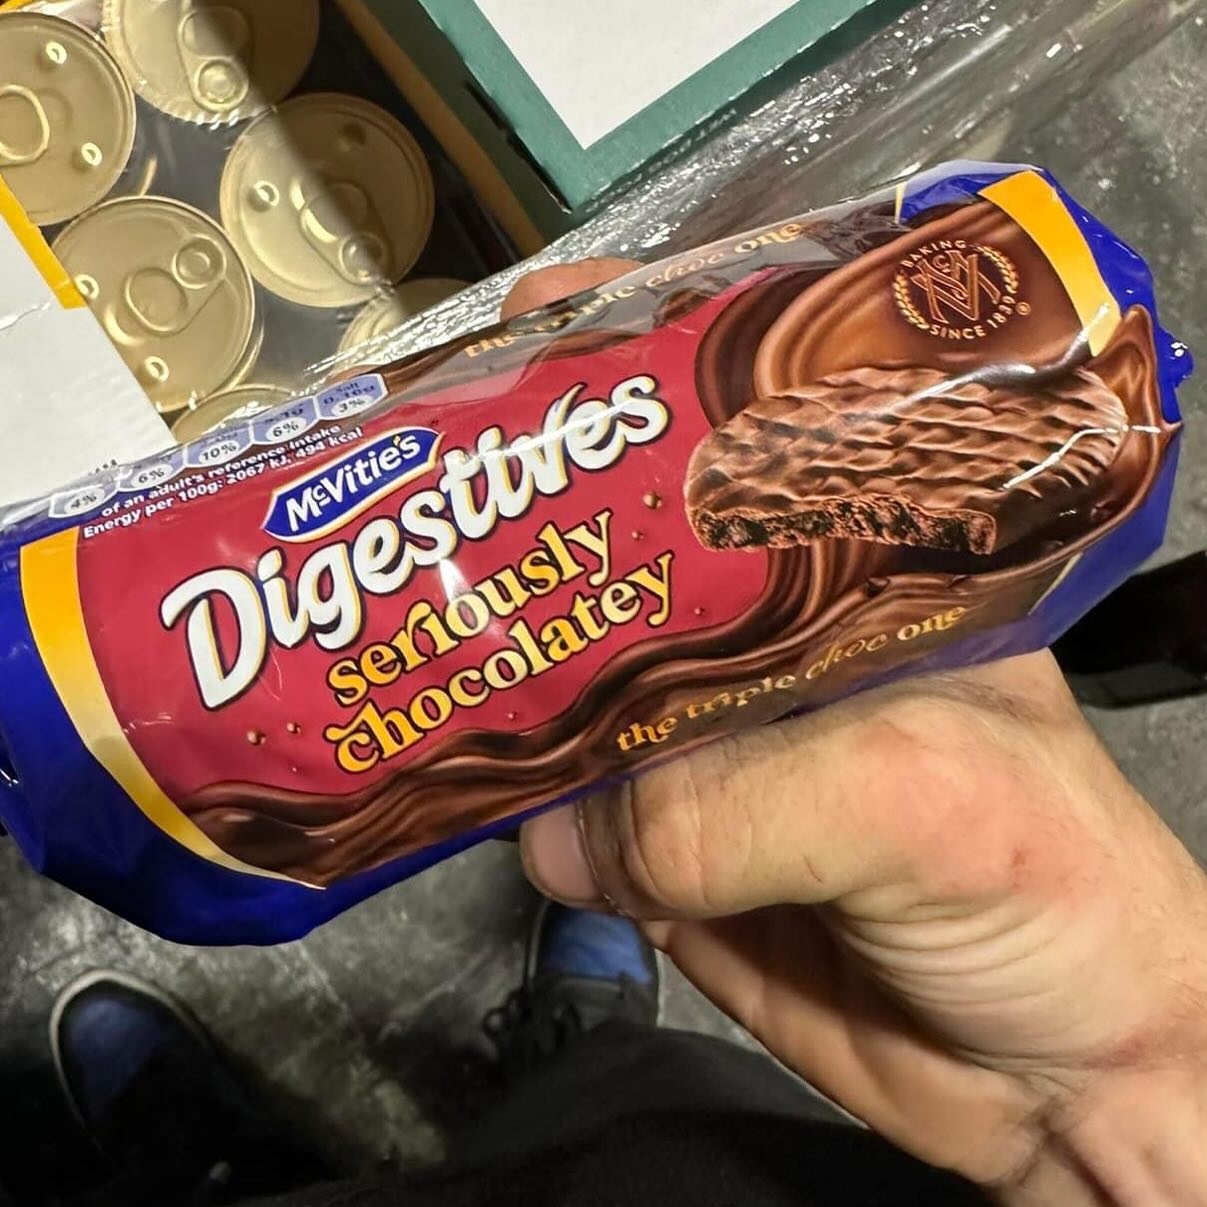 These new biscuits are hitting the shelves at Morrisons